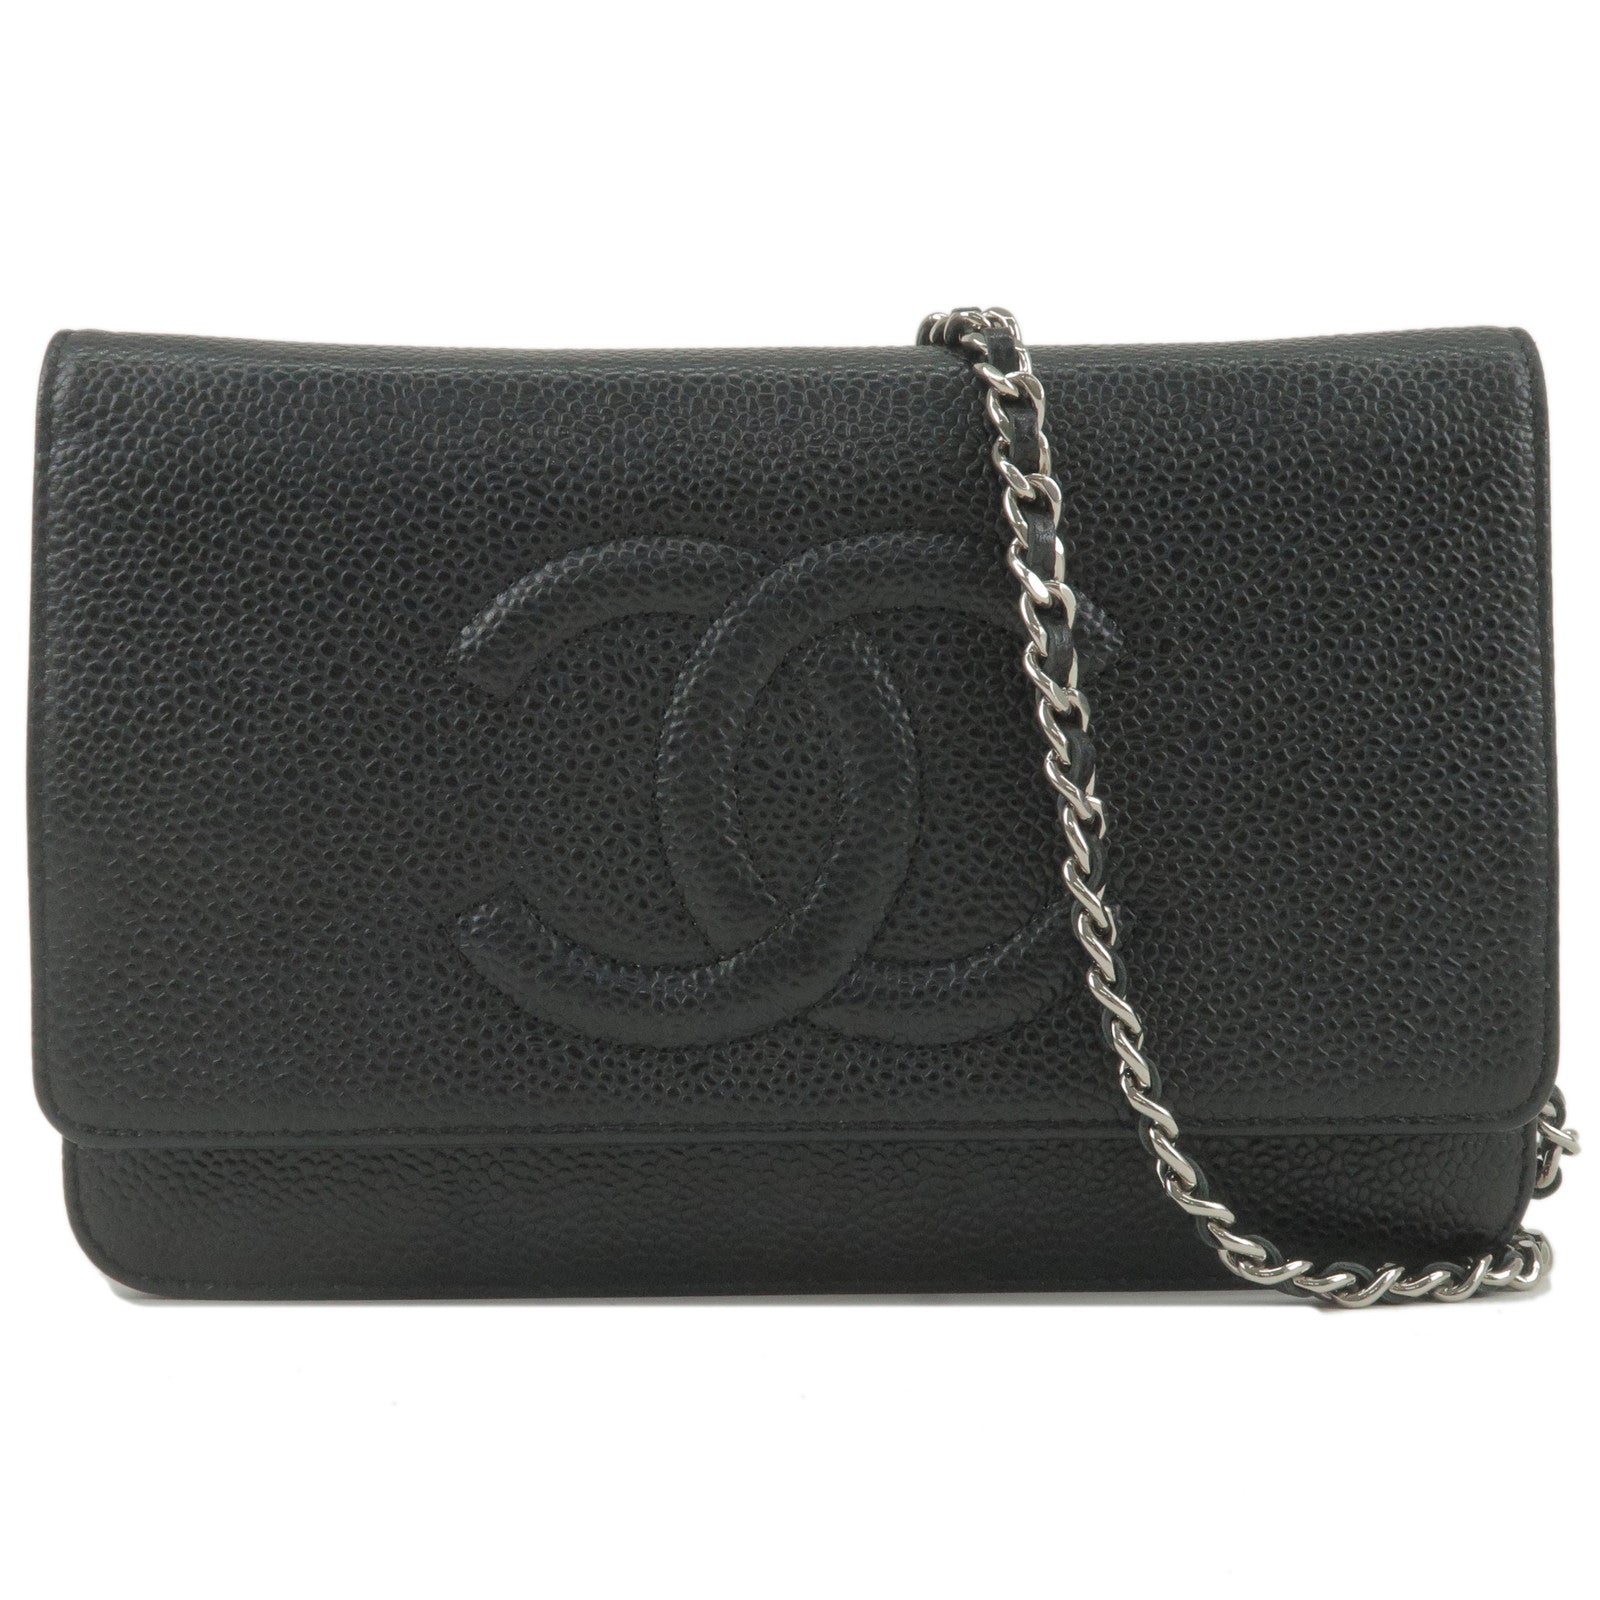 Chanel Black Quilted Caviar Wallet on Chain Gold Hardware, 2012 (Like New), Womens Handbag